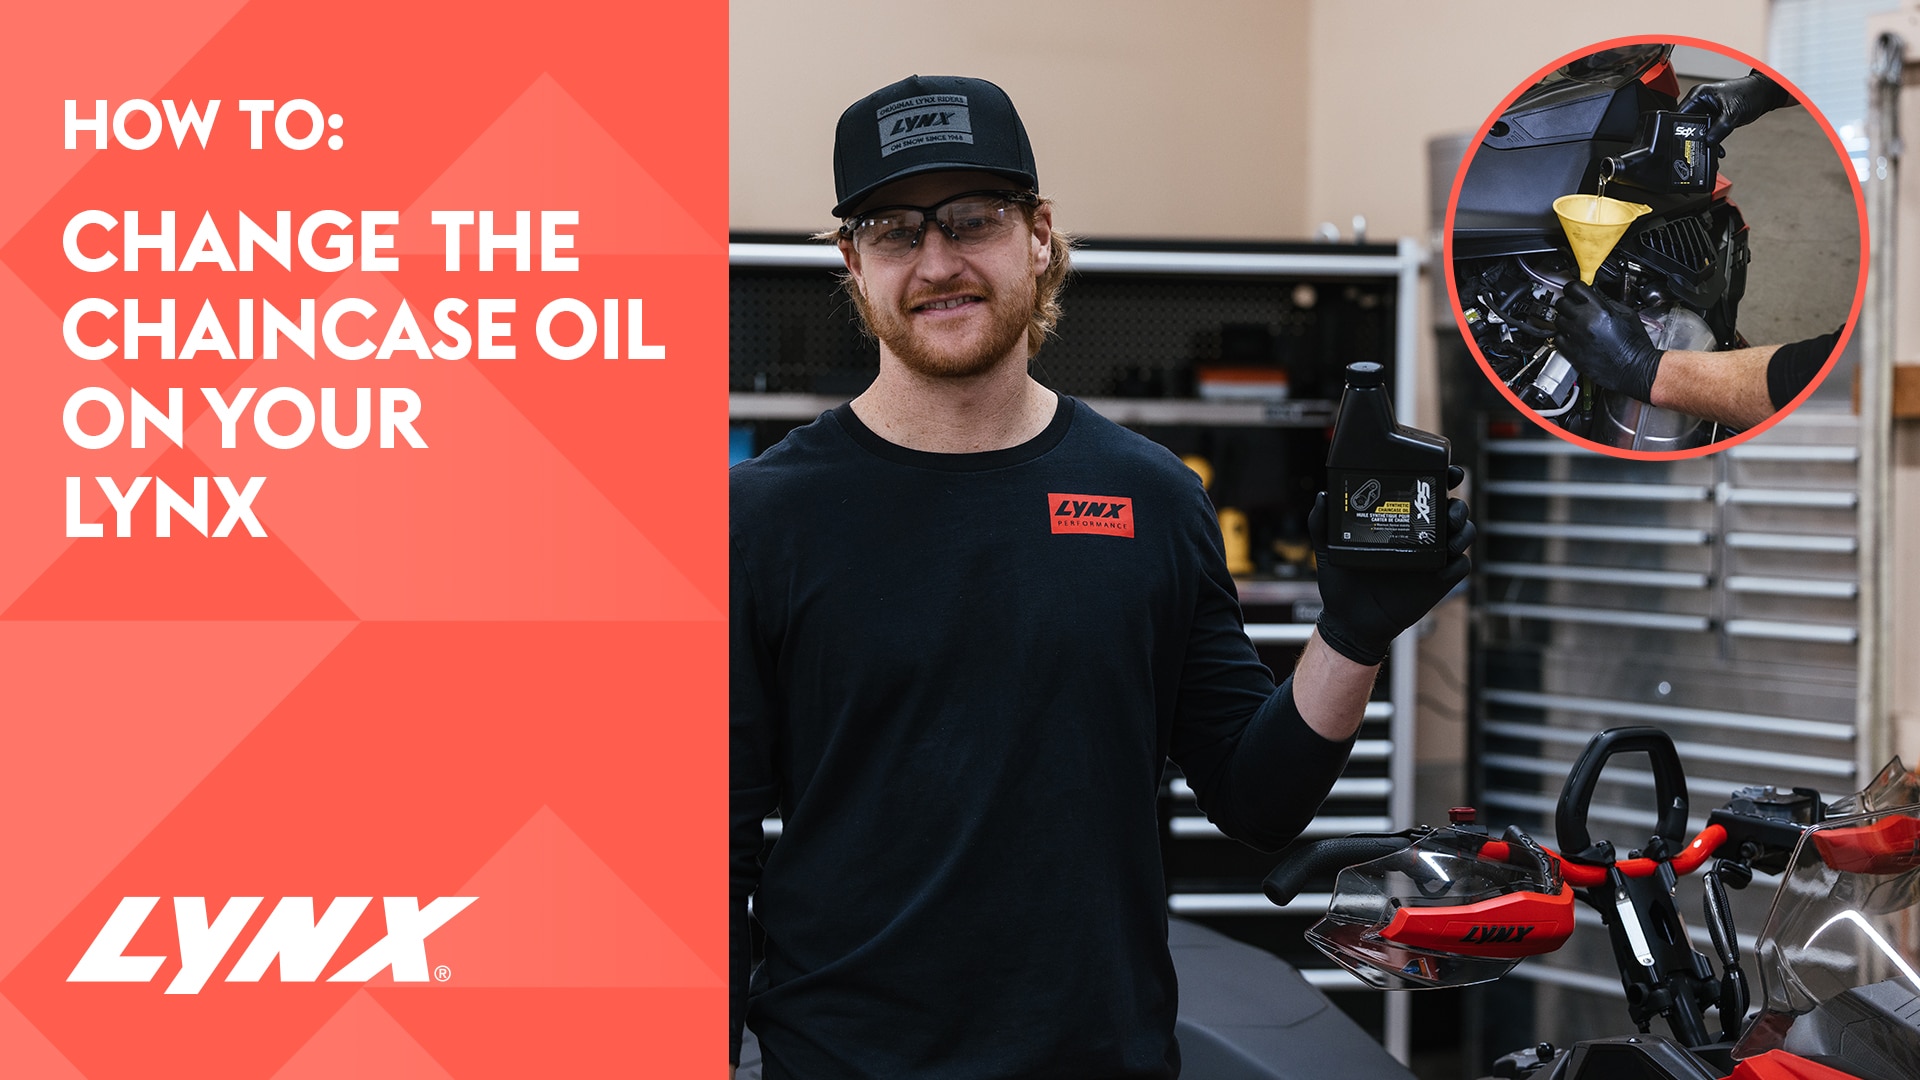 YouTube video - How to - Change the chaincase oil on your Lynx